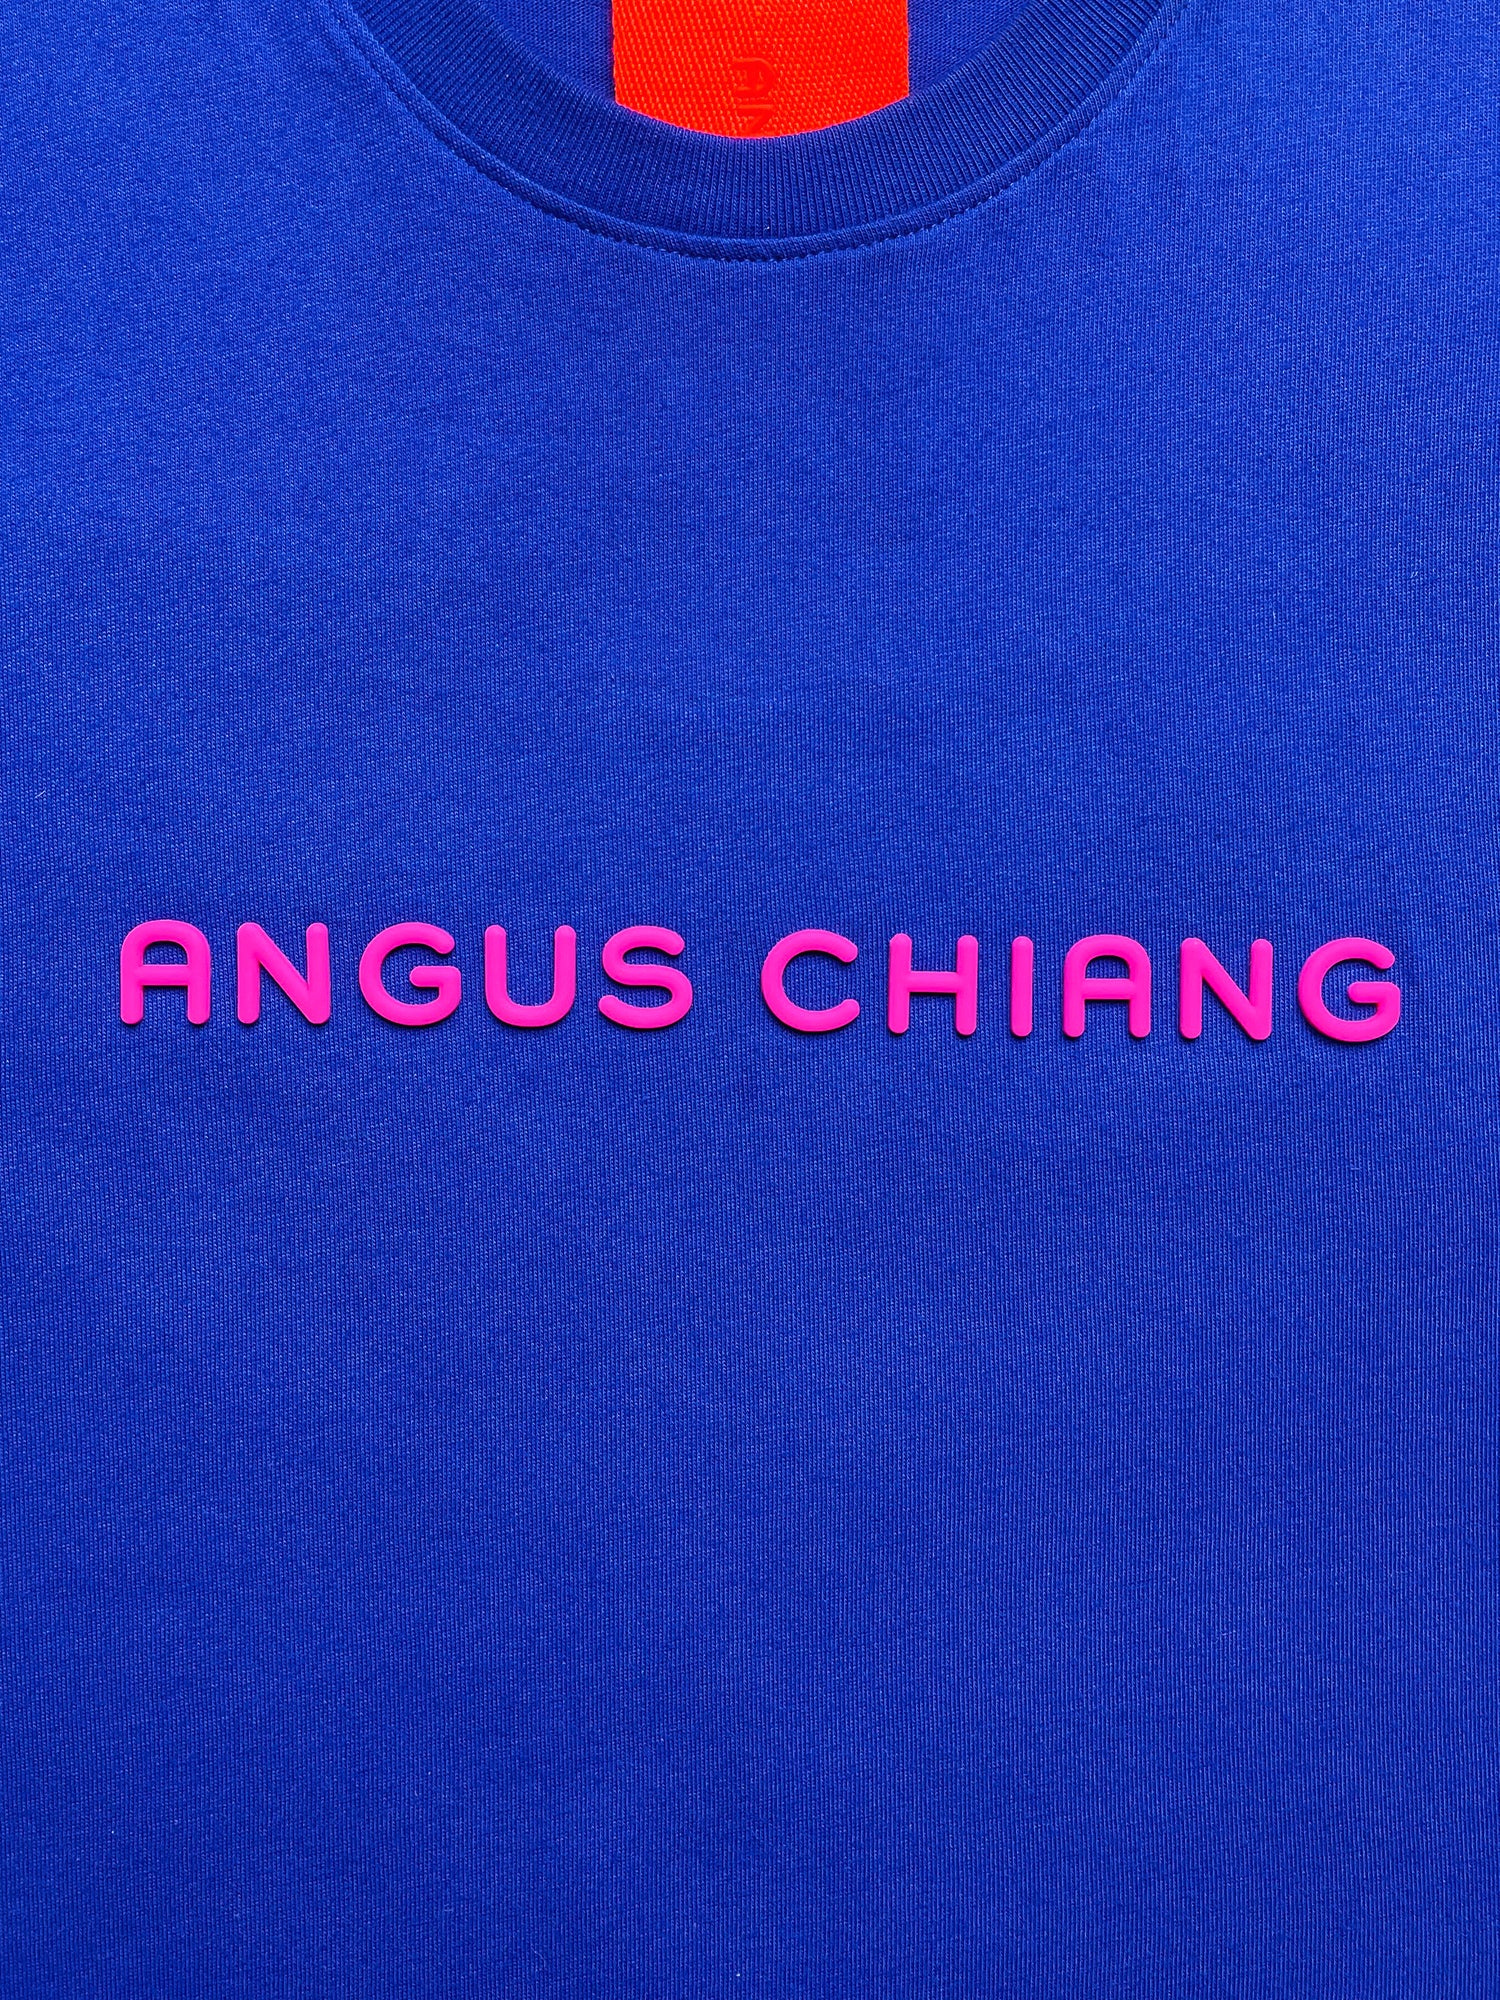 [ 517 LOVE WINS PROJECT ] ANGUS CHIANG CLASSIC LOGO T-SHIRT